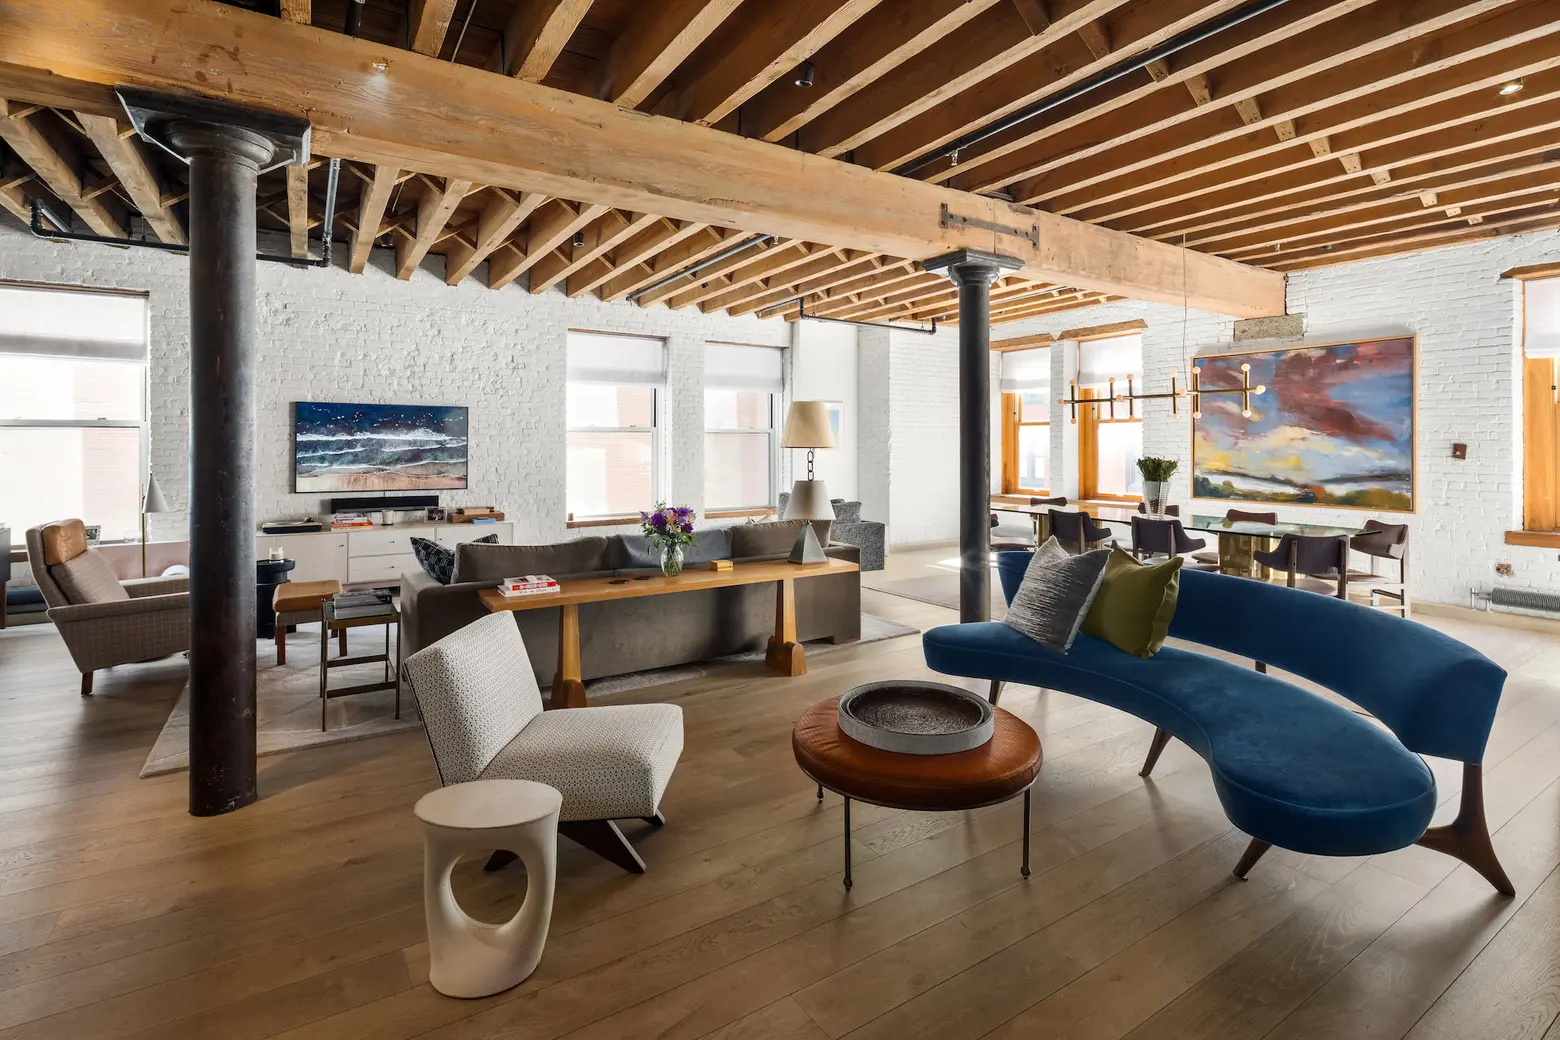 This $7.25M loft in a star-studded Tribeca building is both beautiful and livable